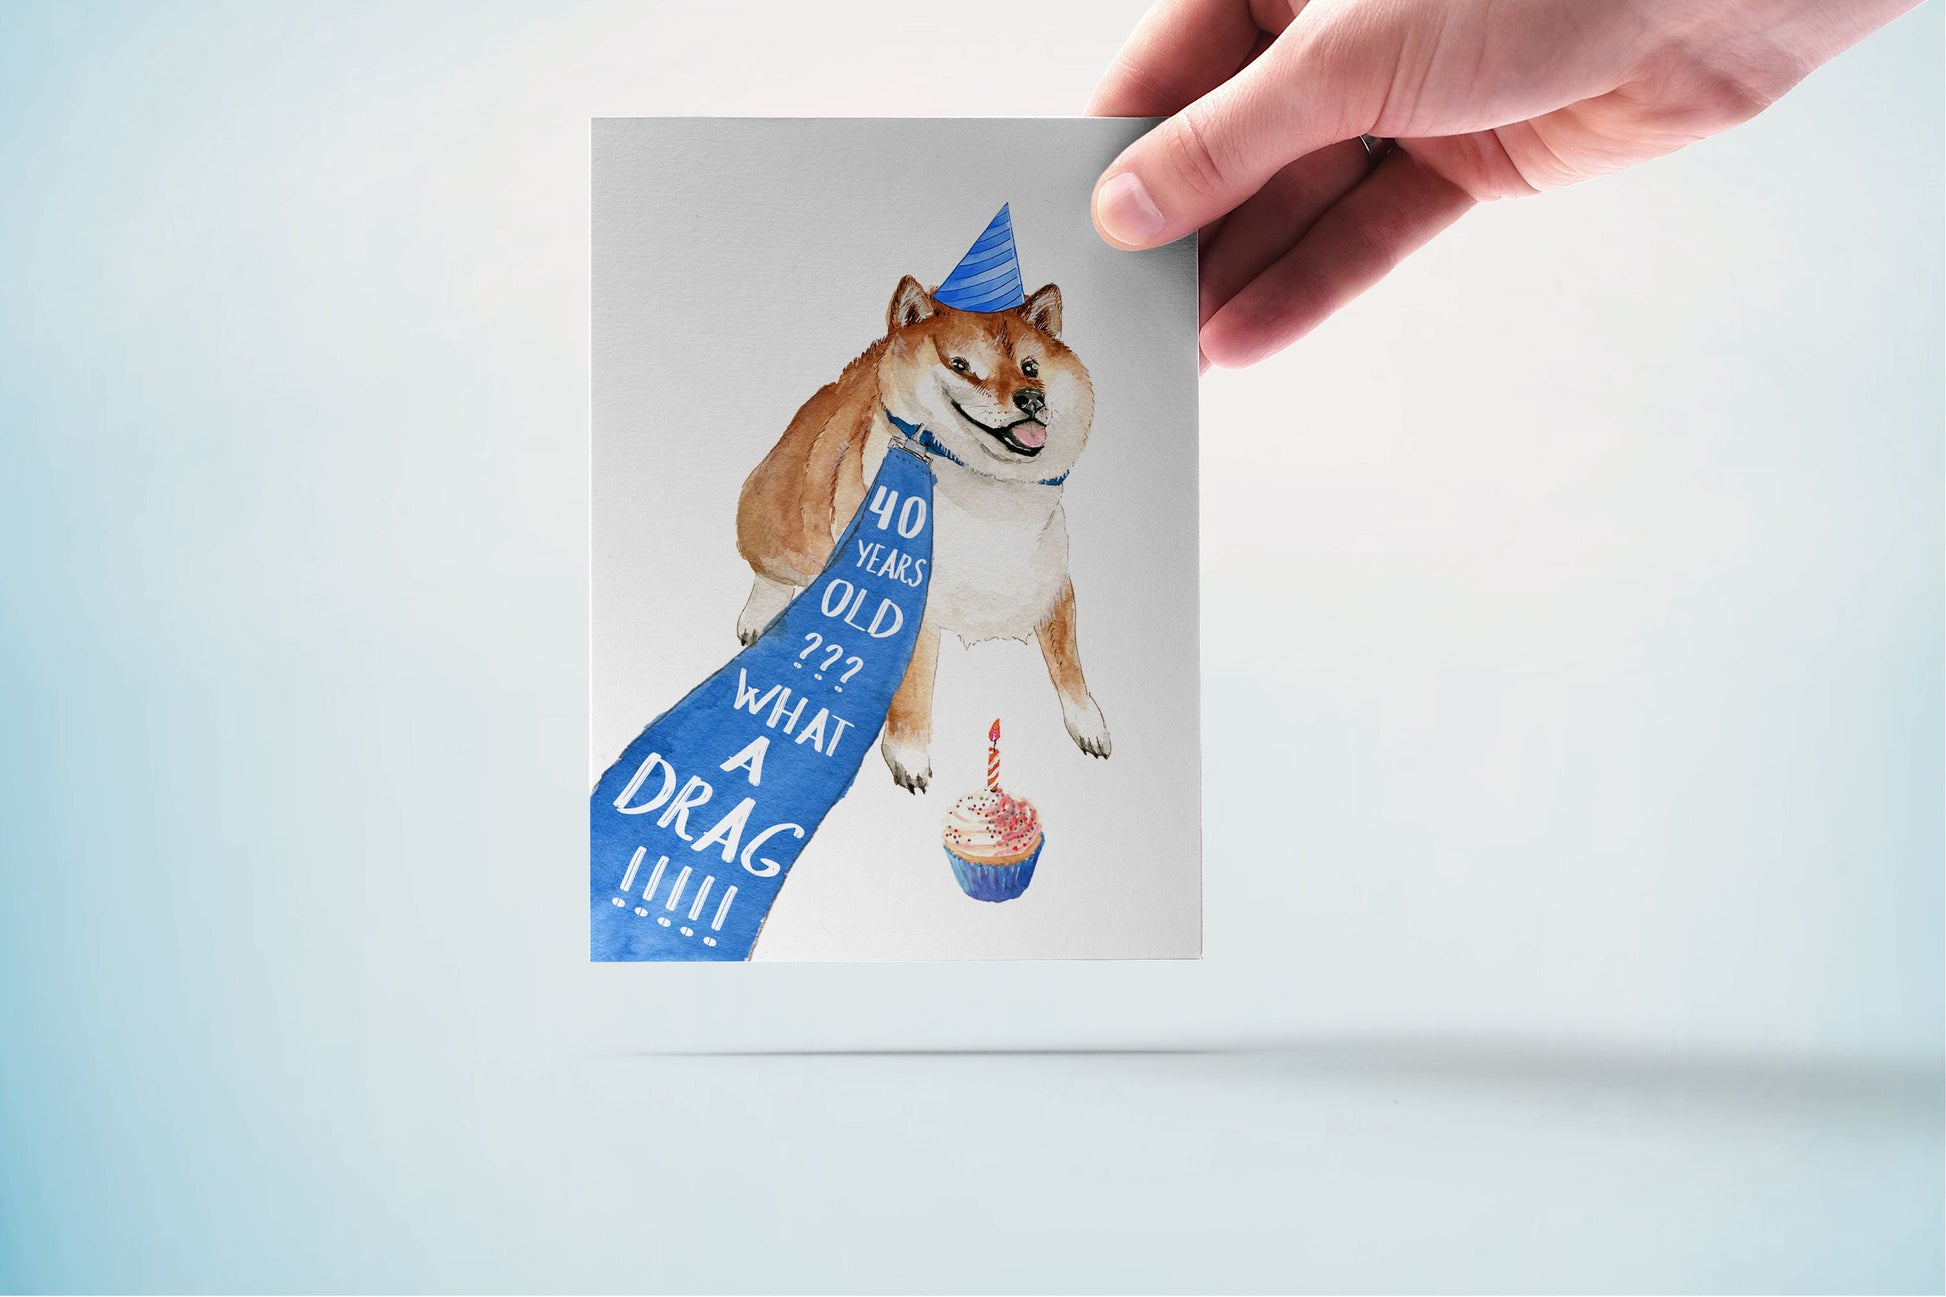 Doge Funny 40th Birthday Card For Best Friend - Shiba Inu Dog Birthday Cards For Men - Cute 40th Birthday Gift For Women